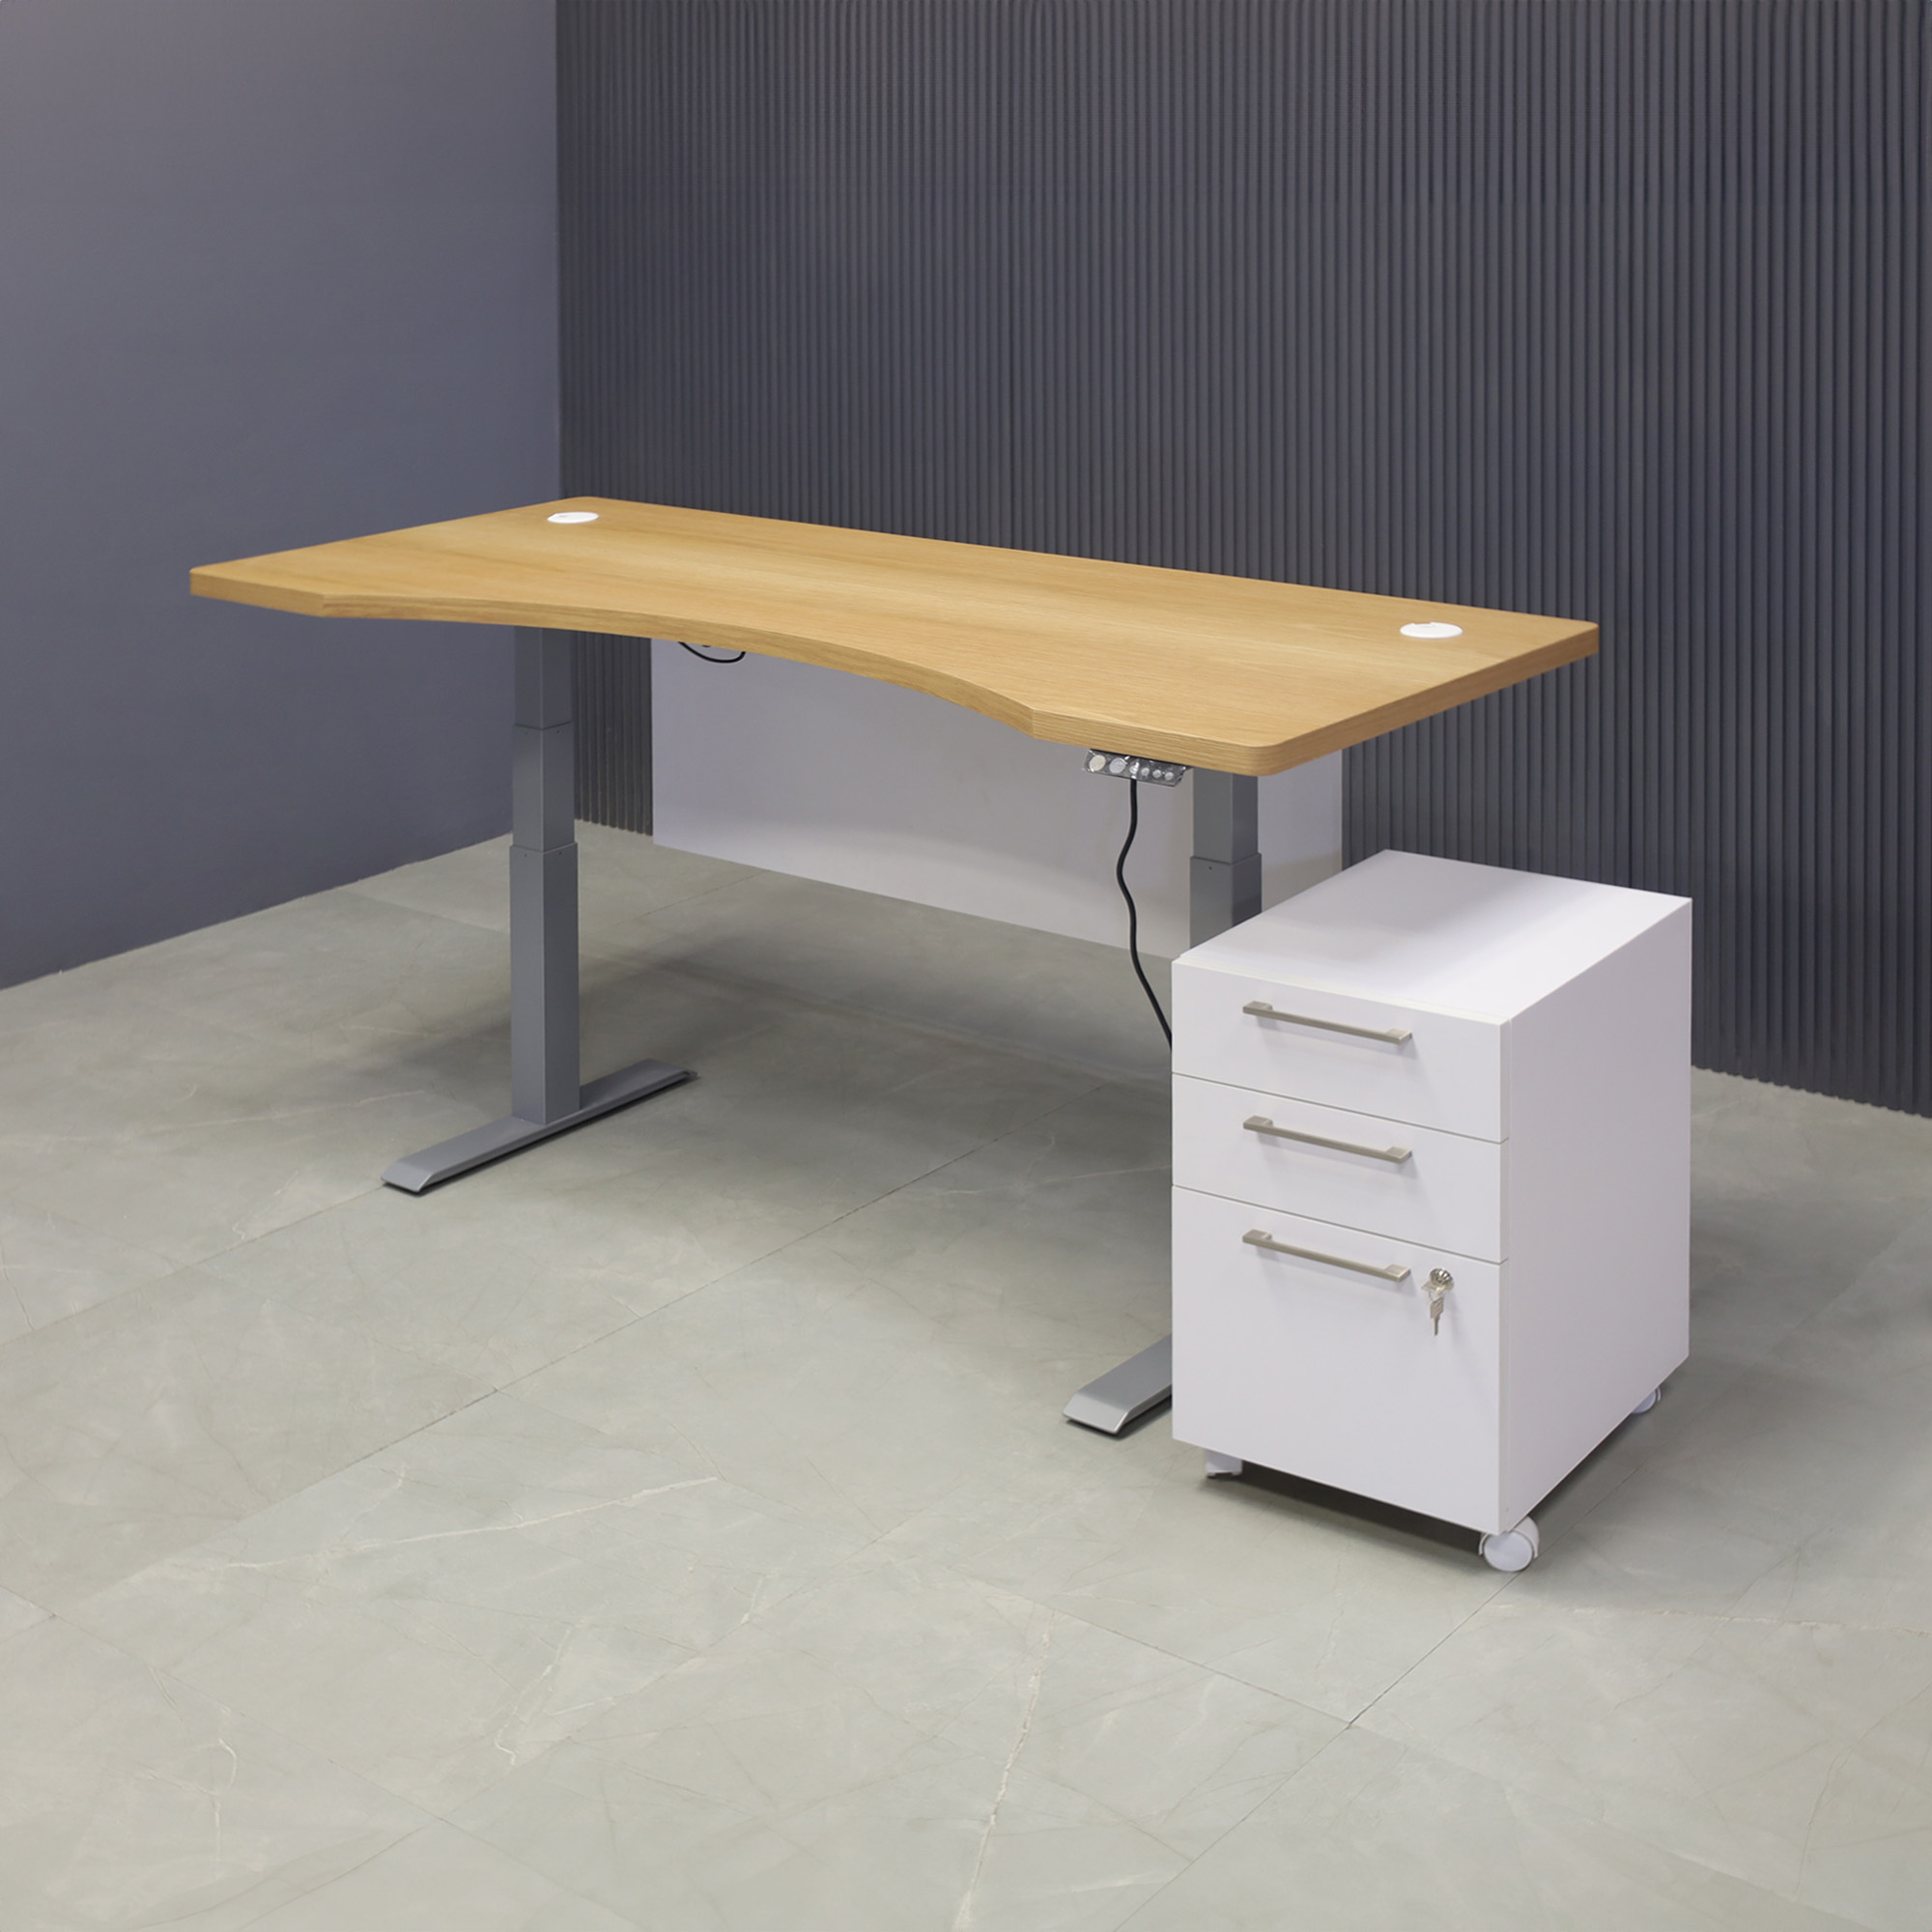 72-inch aXis Sit-stand Executive Desk in white oak veneer top, white matte laminate privacy panel and silver metal legs, with a white matte laminate mobile cabinet, shown here.